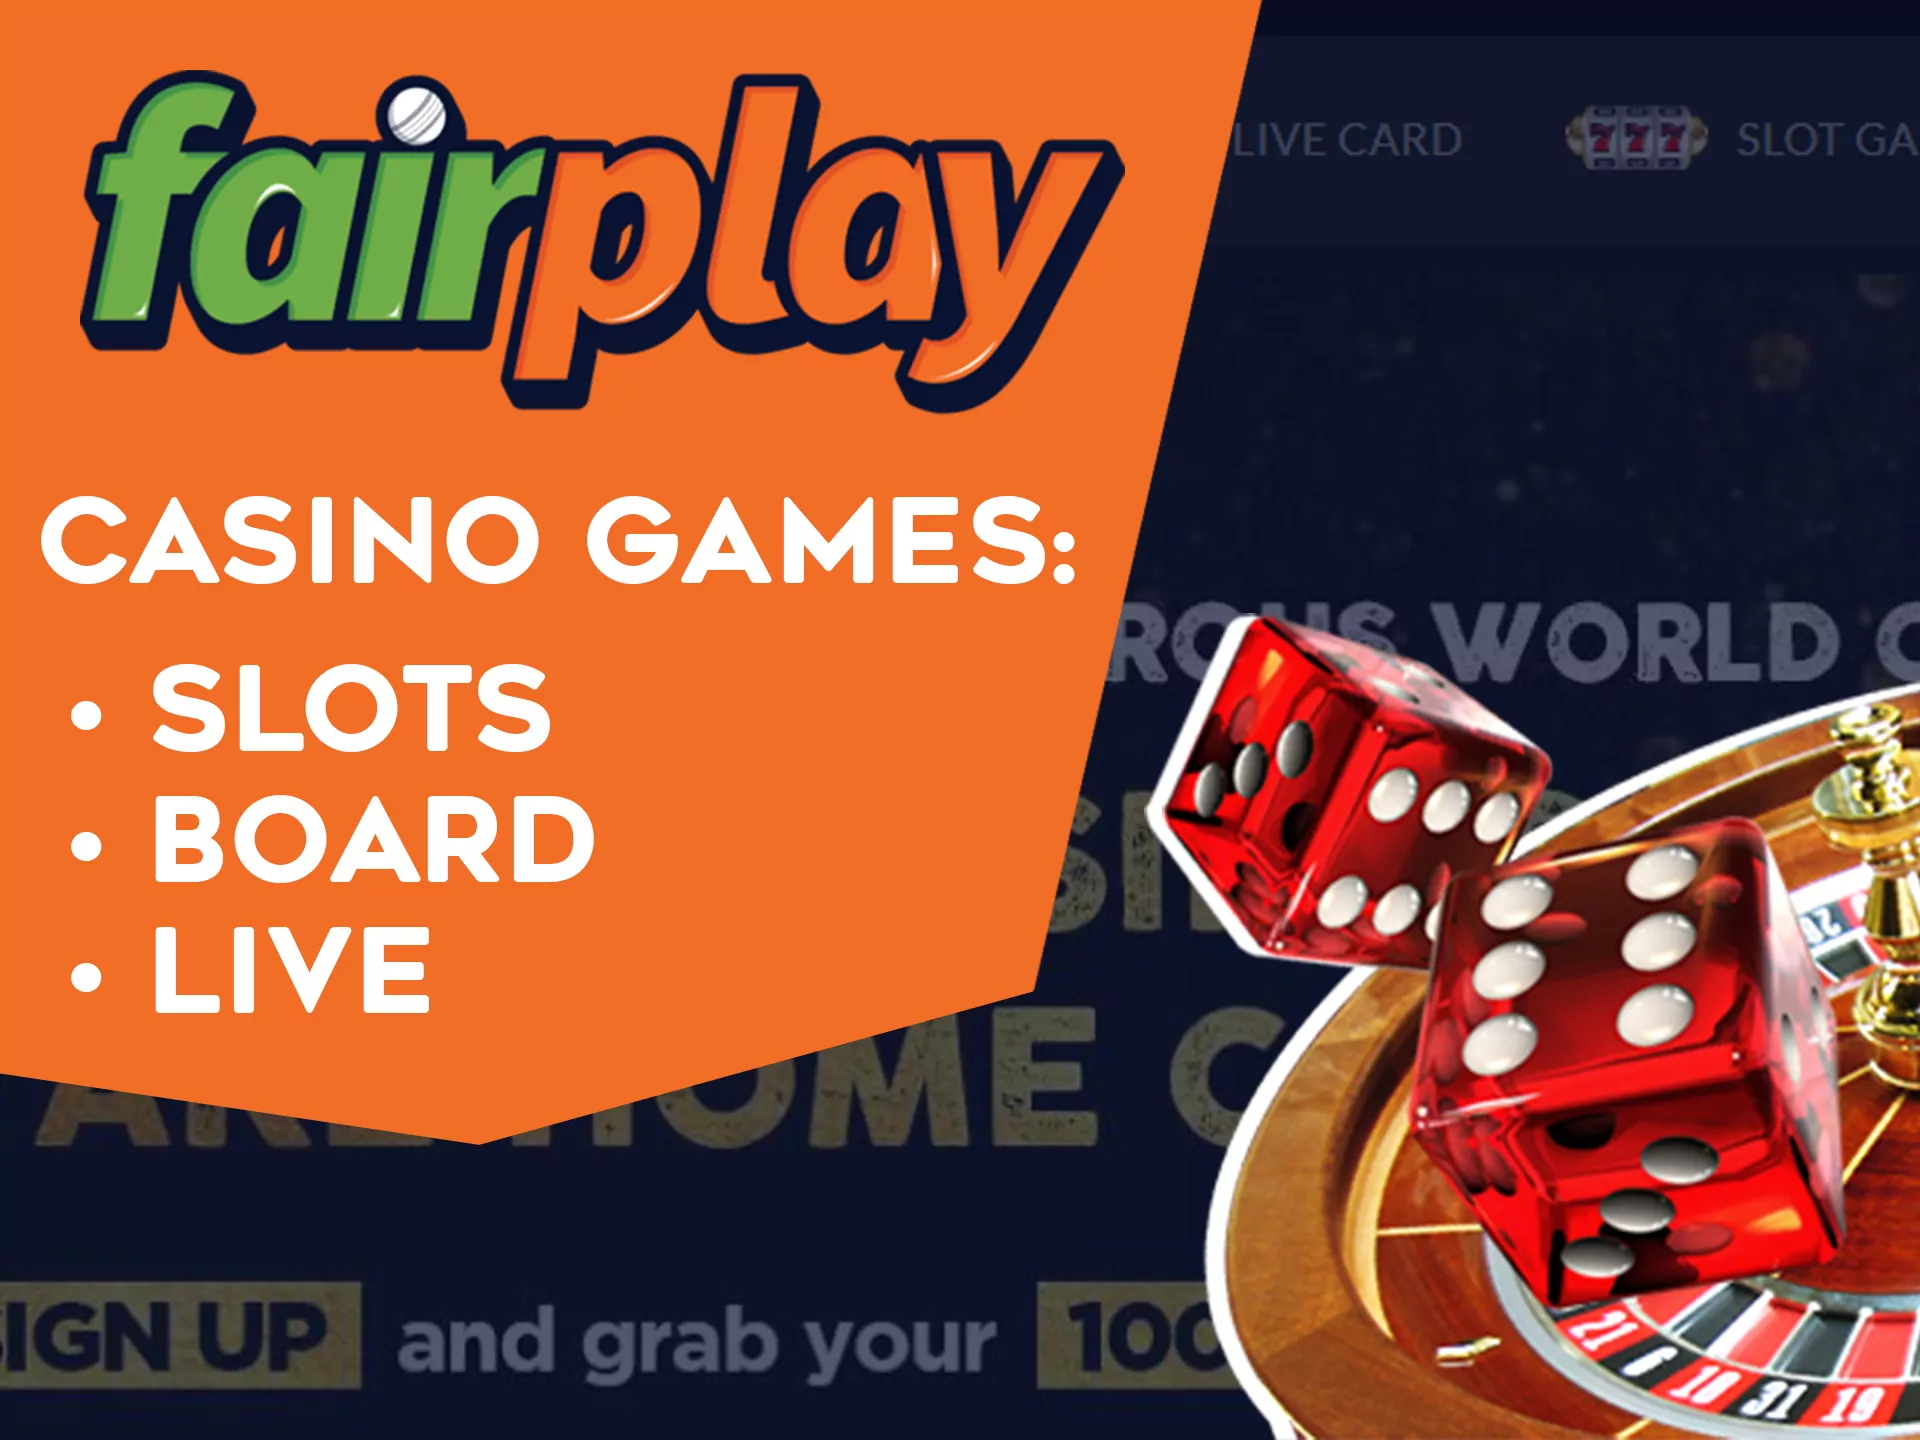 You can play slots, card games and live games in the Fairplay casino.